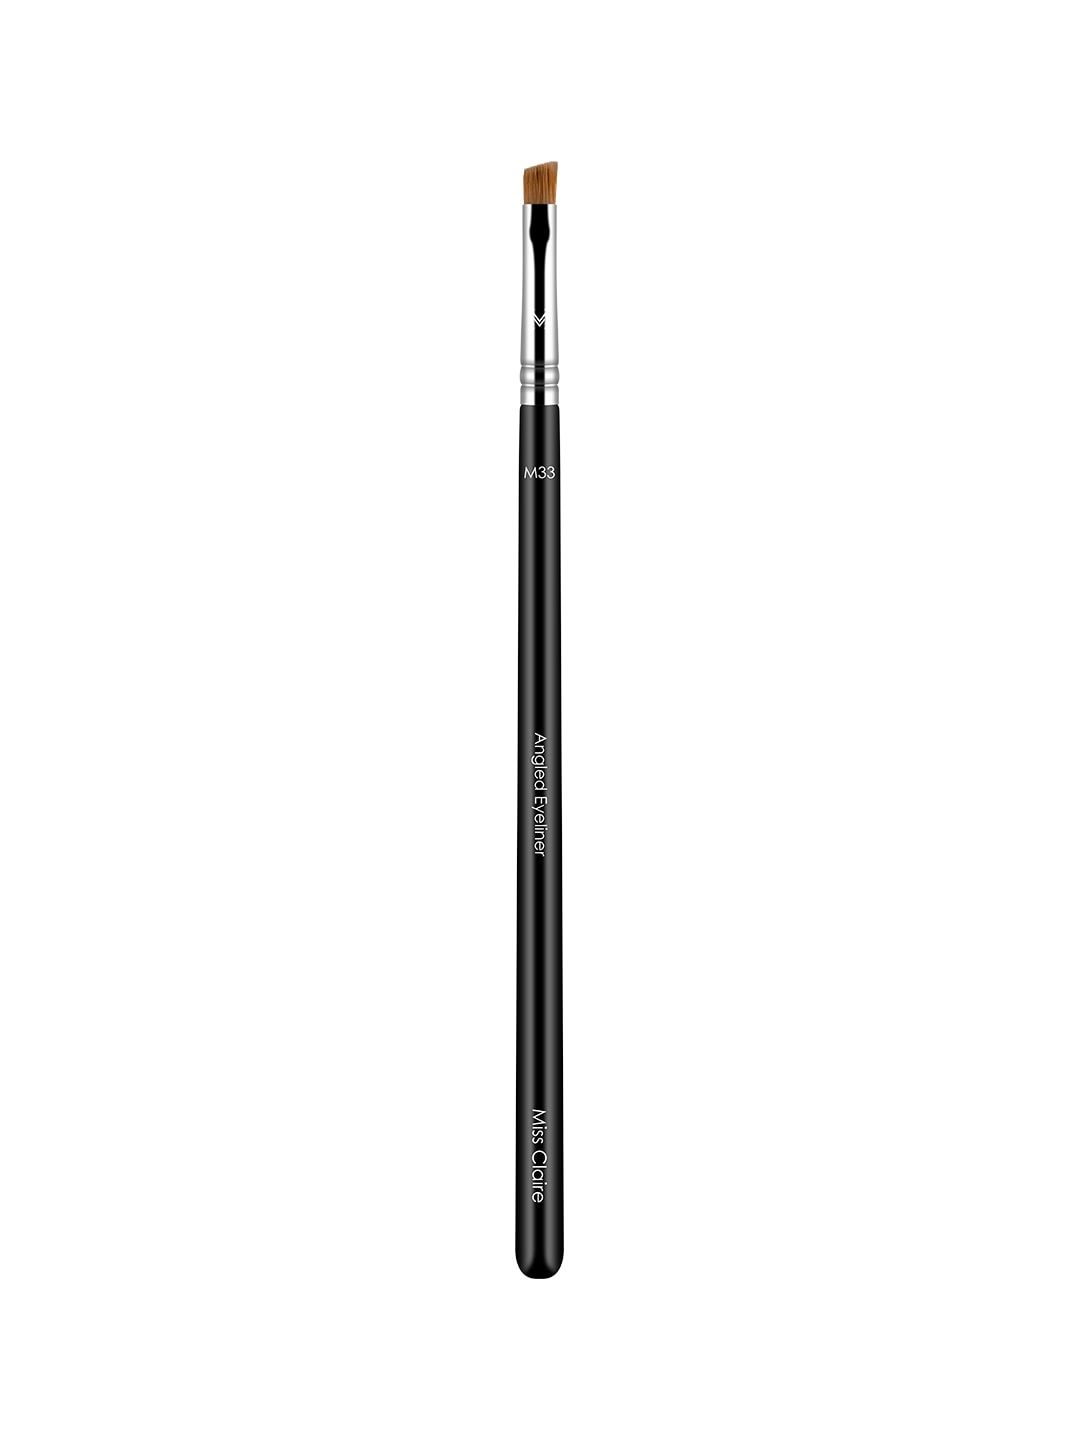 Miss Claire M33 - Angled Eyeliner Brush - Silver-Toned & Black Price in India